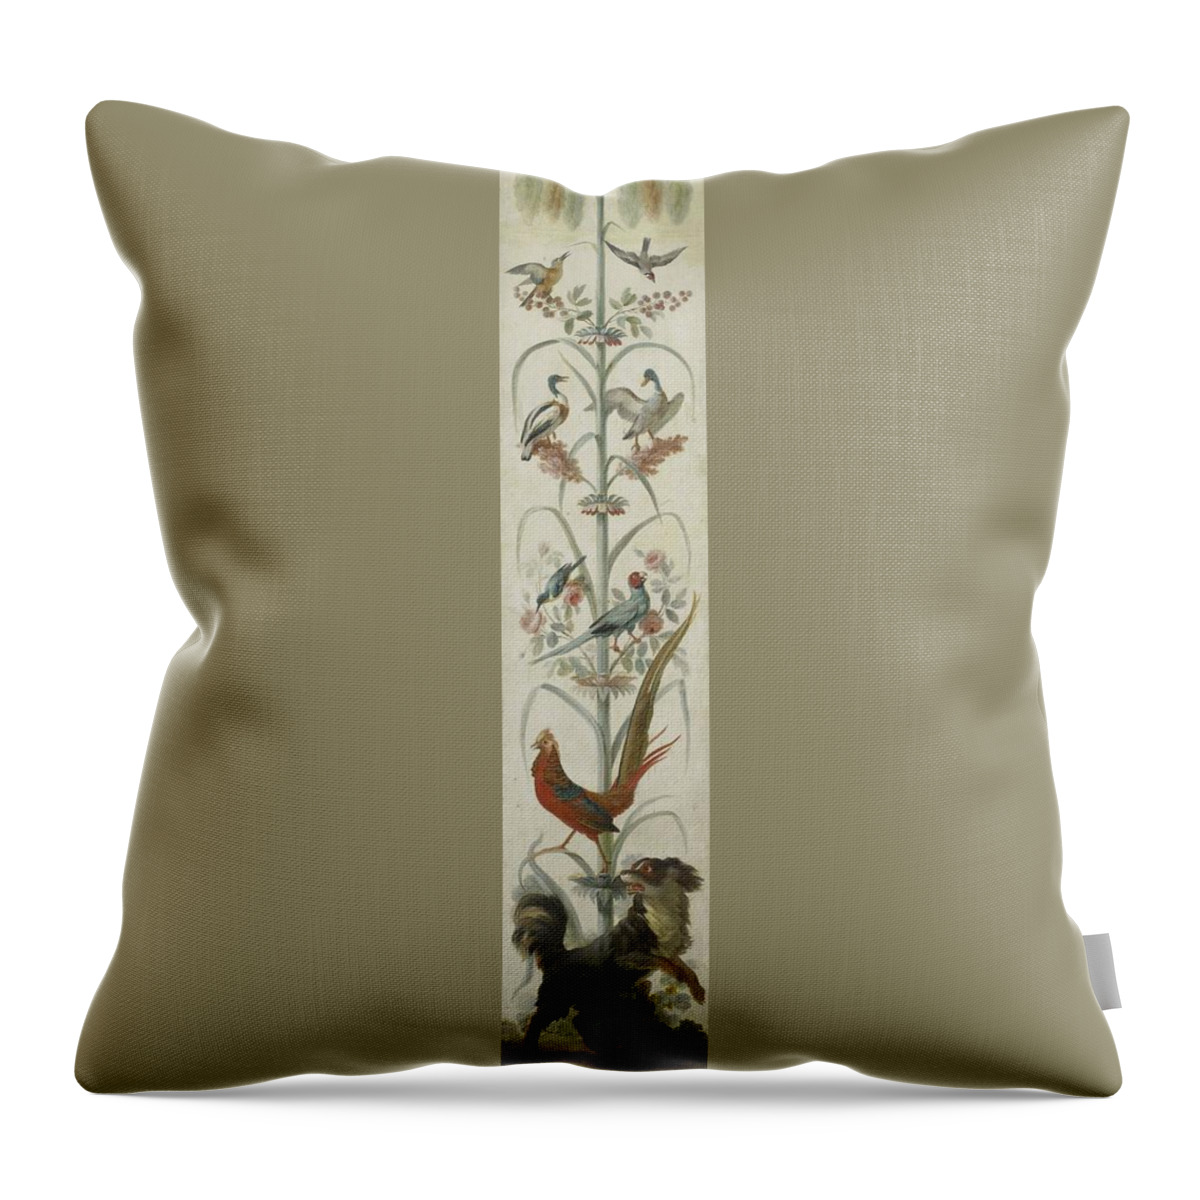 Decorative Depiction With Plants And Animals Throw Pillow featuring the painting Decorative Depiction with Plants and Animals #5 by MotionAge Designs